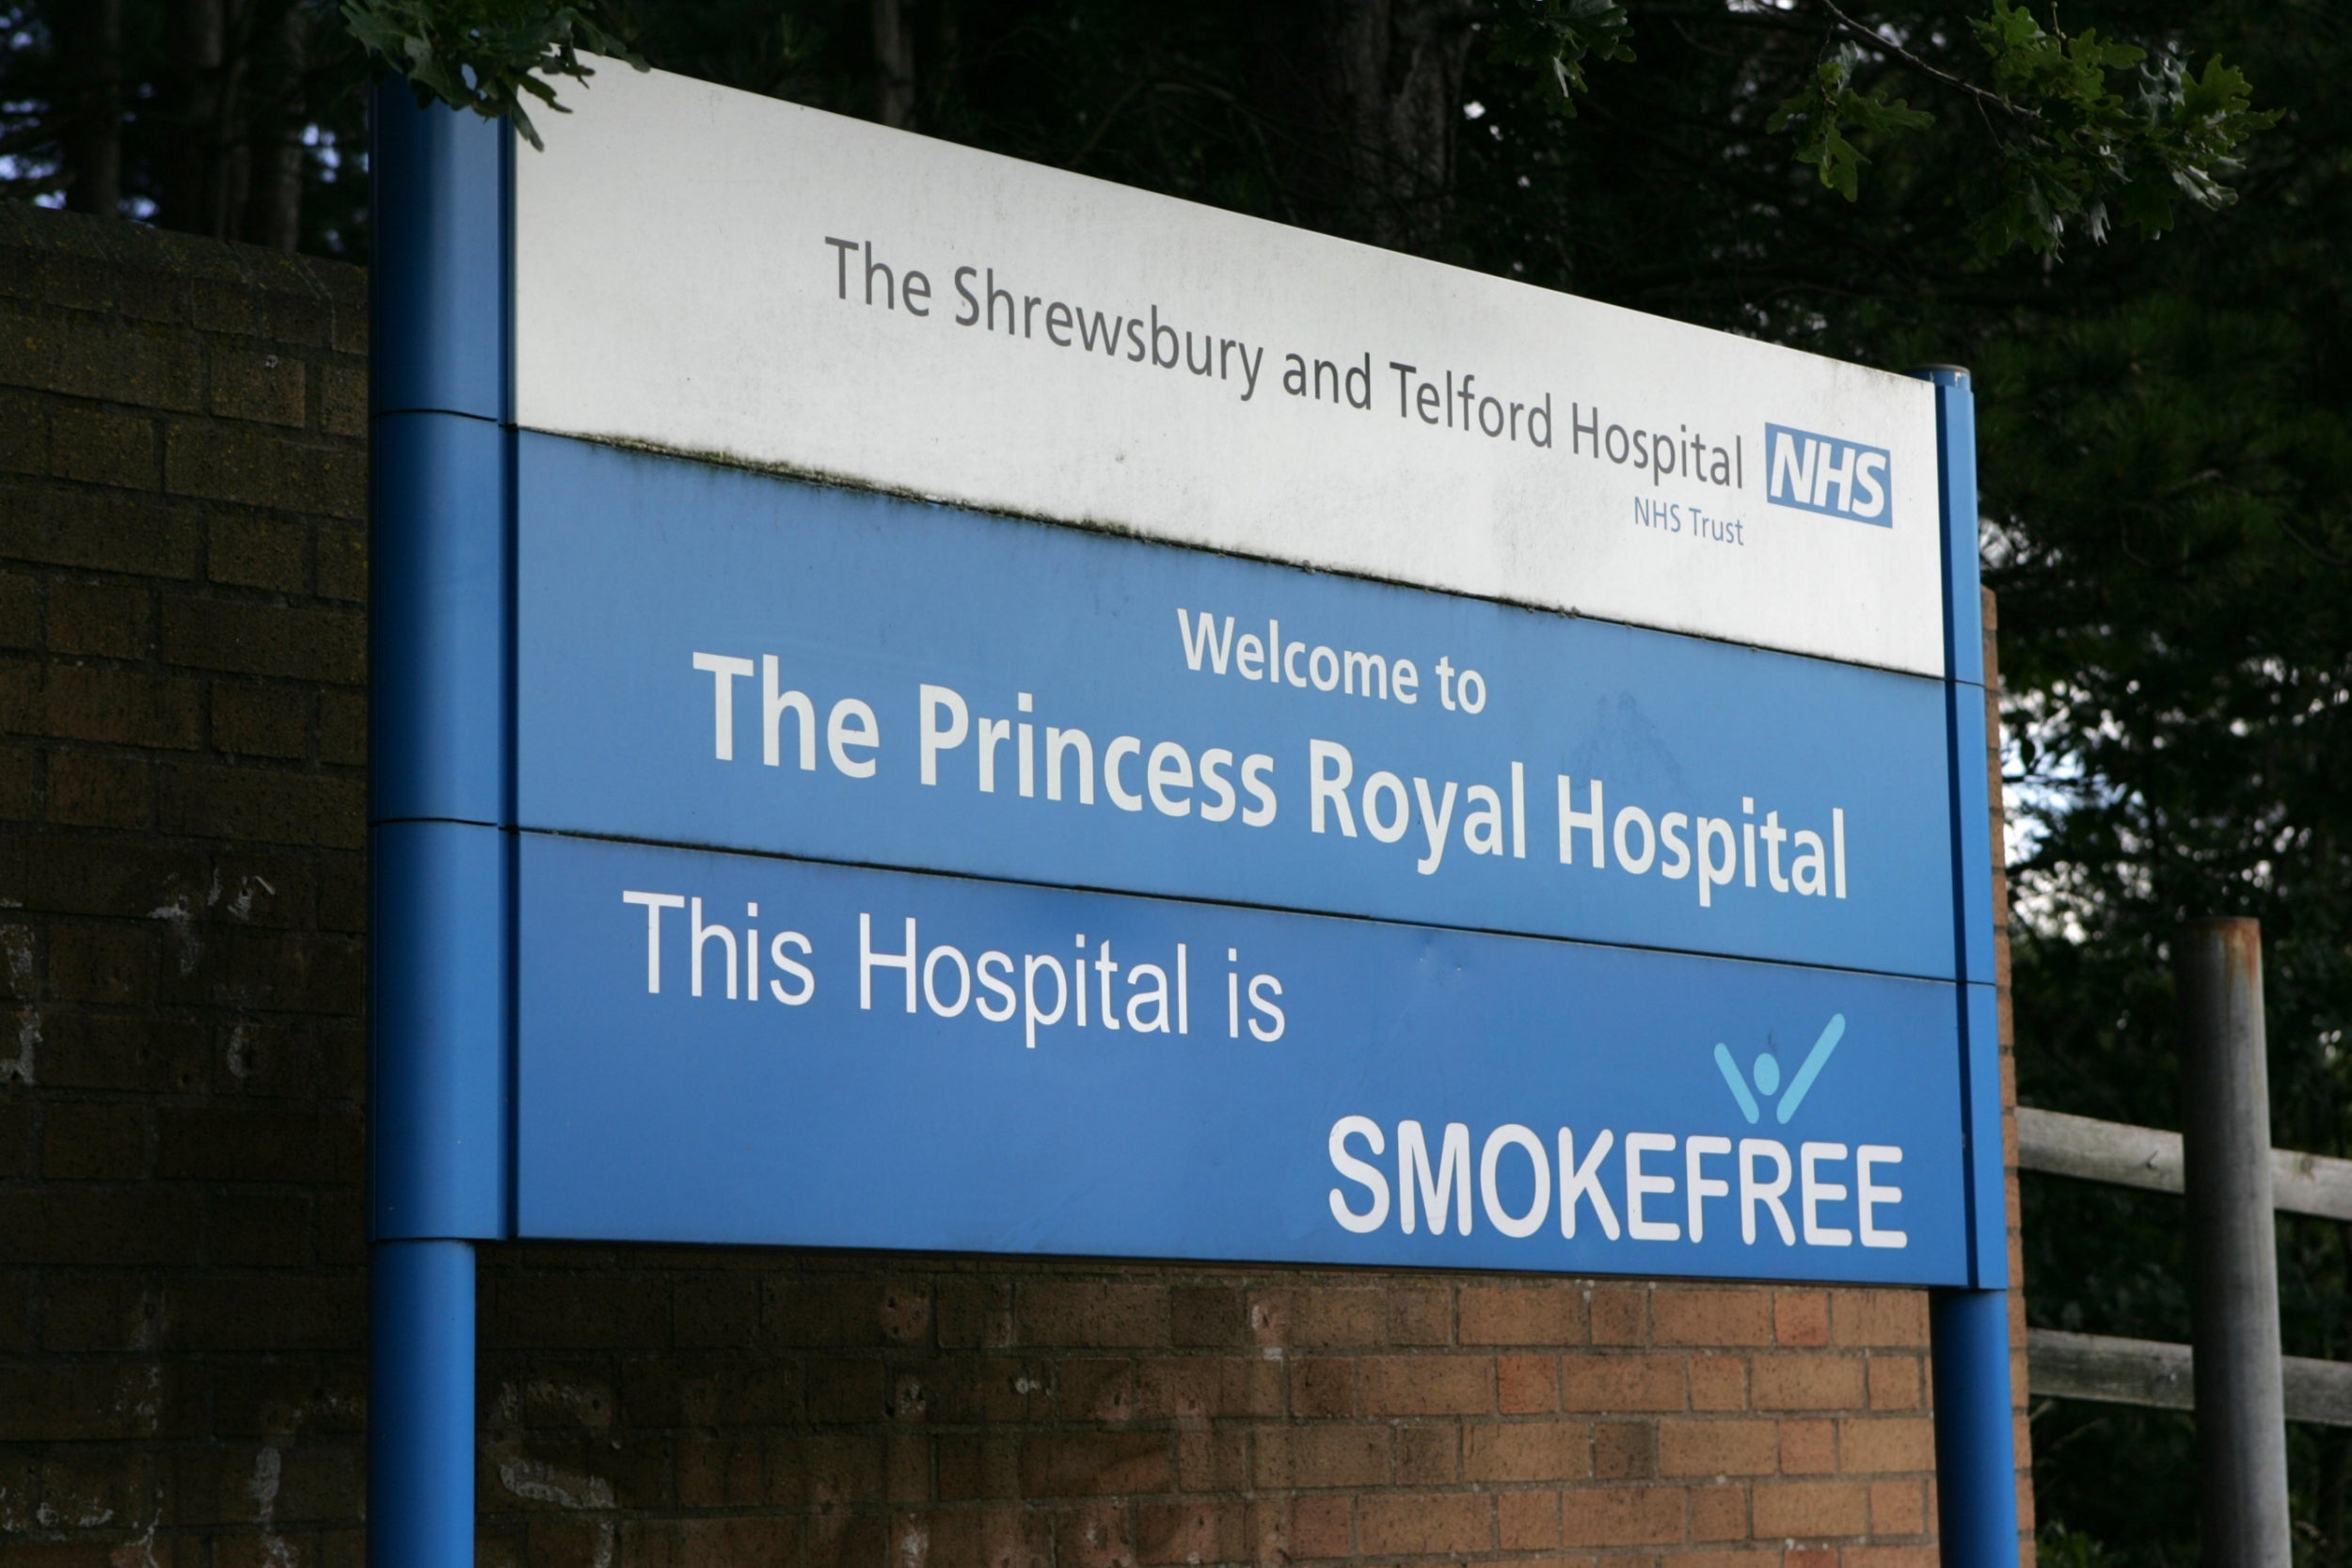 An inquiry into poor care at Shrewsbury and Telford Hospital Trust in examining 1,862 cases